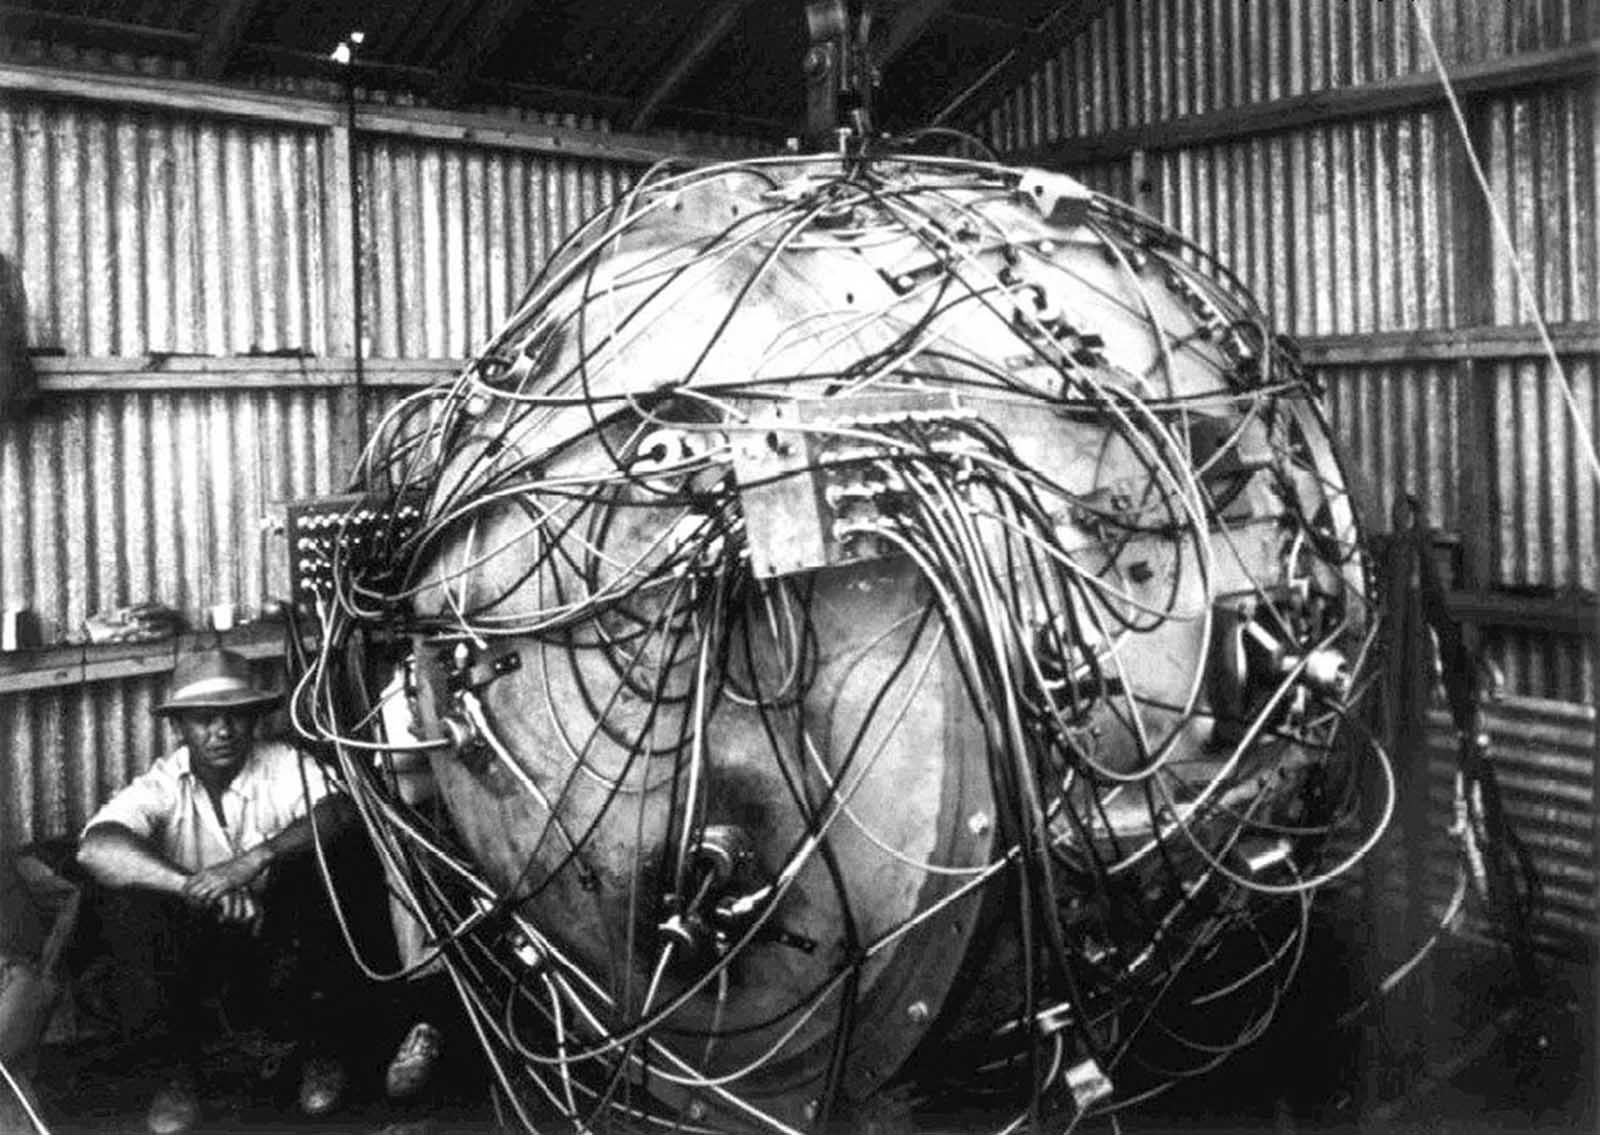 Exposed wiring of “The Gadget,” the nuclear device that exploded as part of Trinity, the first test of an atomic bomb. At the time of this photo, the device was being prepared for its detonation, which took place on July 16, 1945.